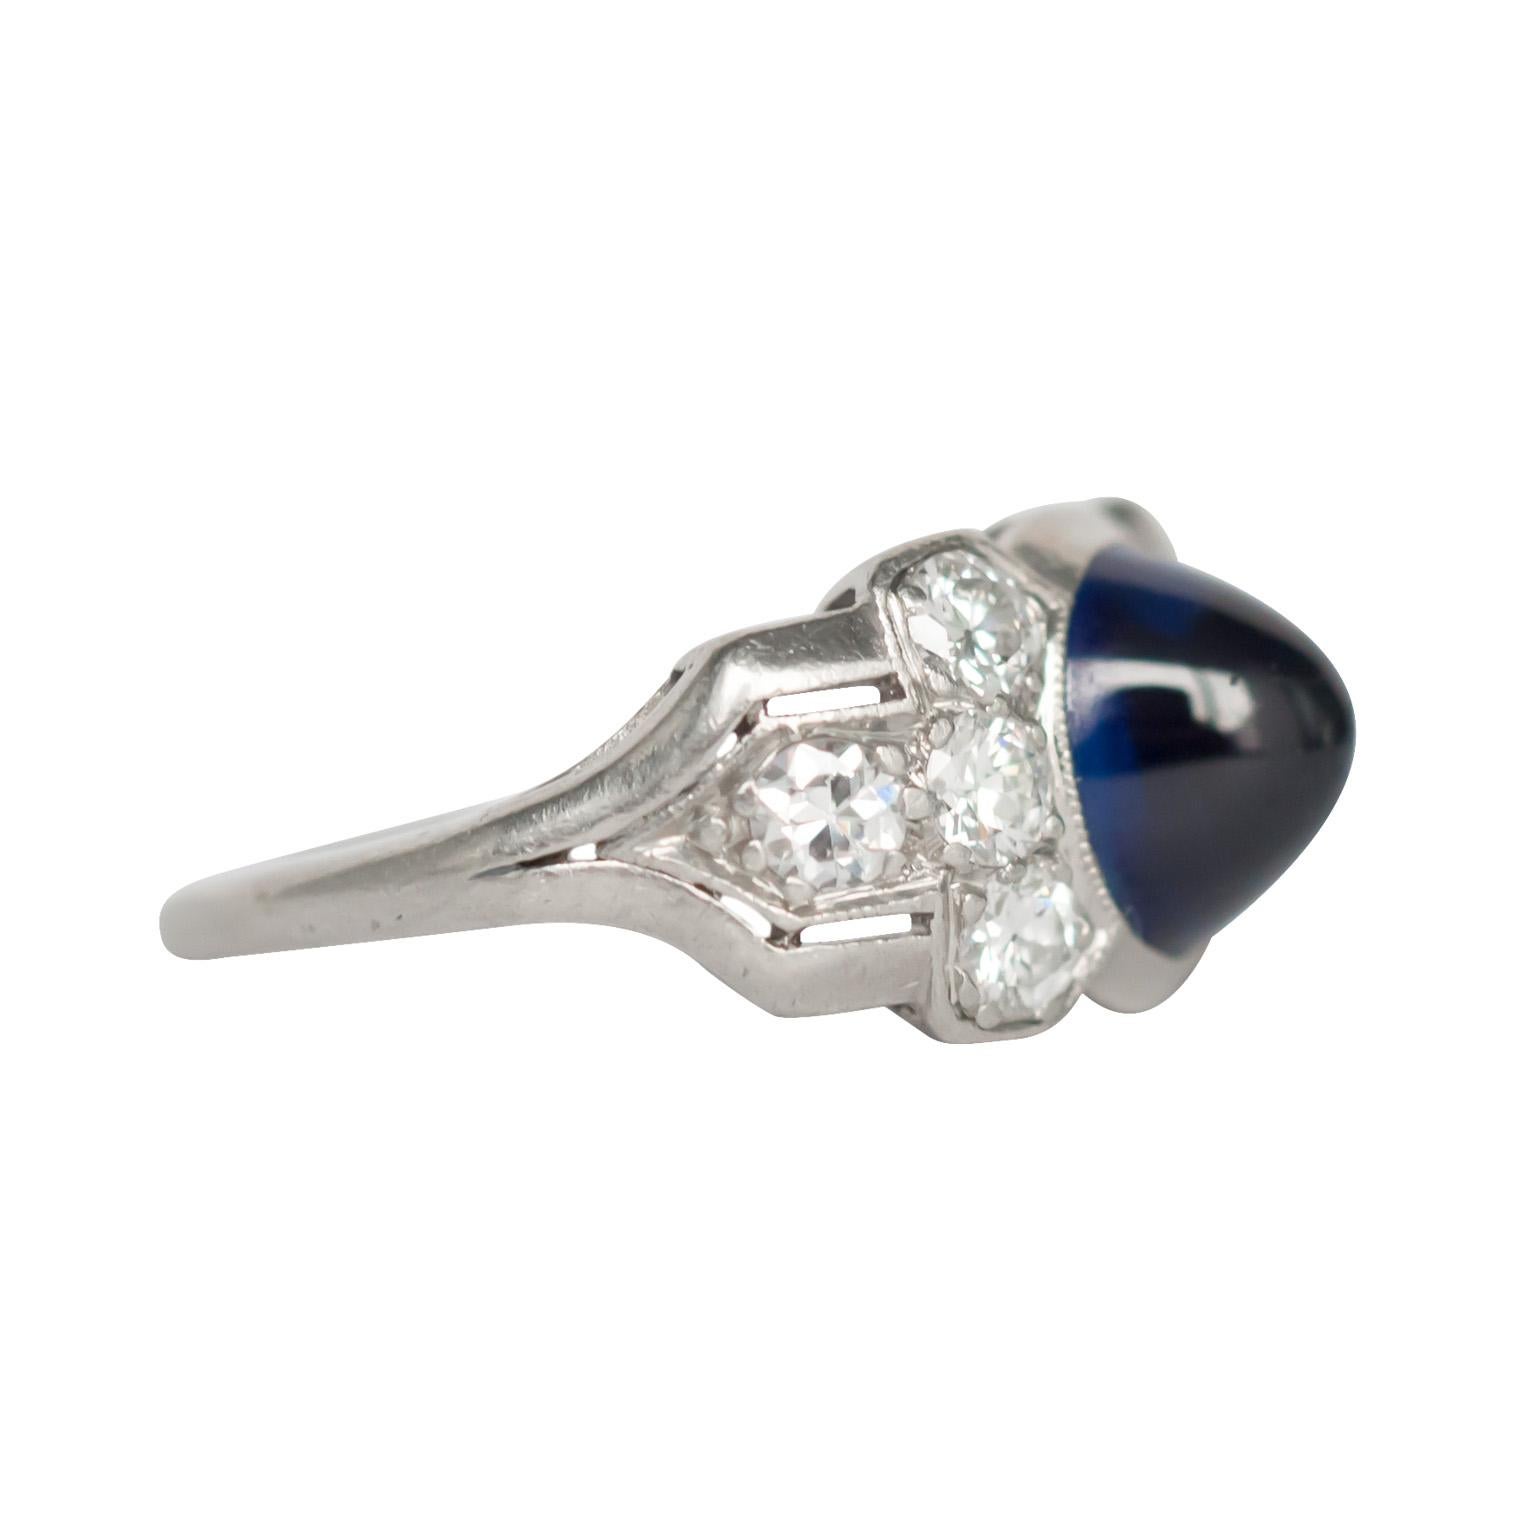 Ring Size: 4
Metal Type: [900 Platinum] [Tested & Hallmark]
Weight: 3.9 grams

Center Sapphire Details
GIA Center - Report # 6207471431
Shape: Sugarloaf Cabachon
Carat Weight: 2.25 carat 
Color: Blue
Clarity: VS

Side Stone Details: 
Shape: Old